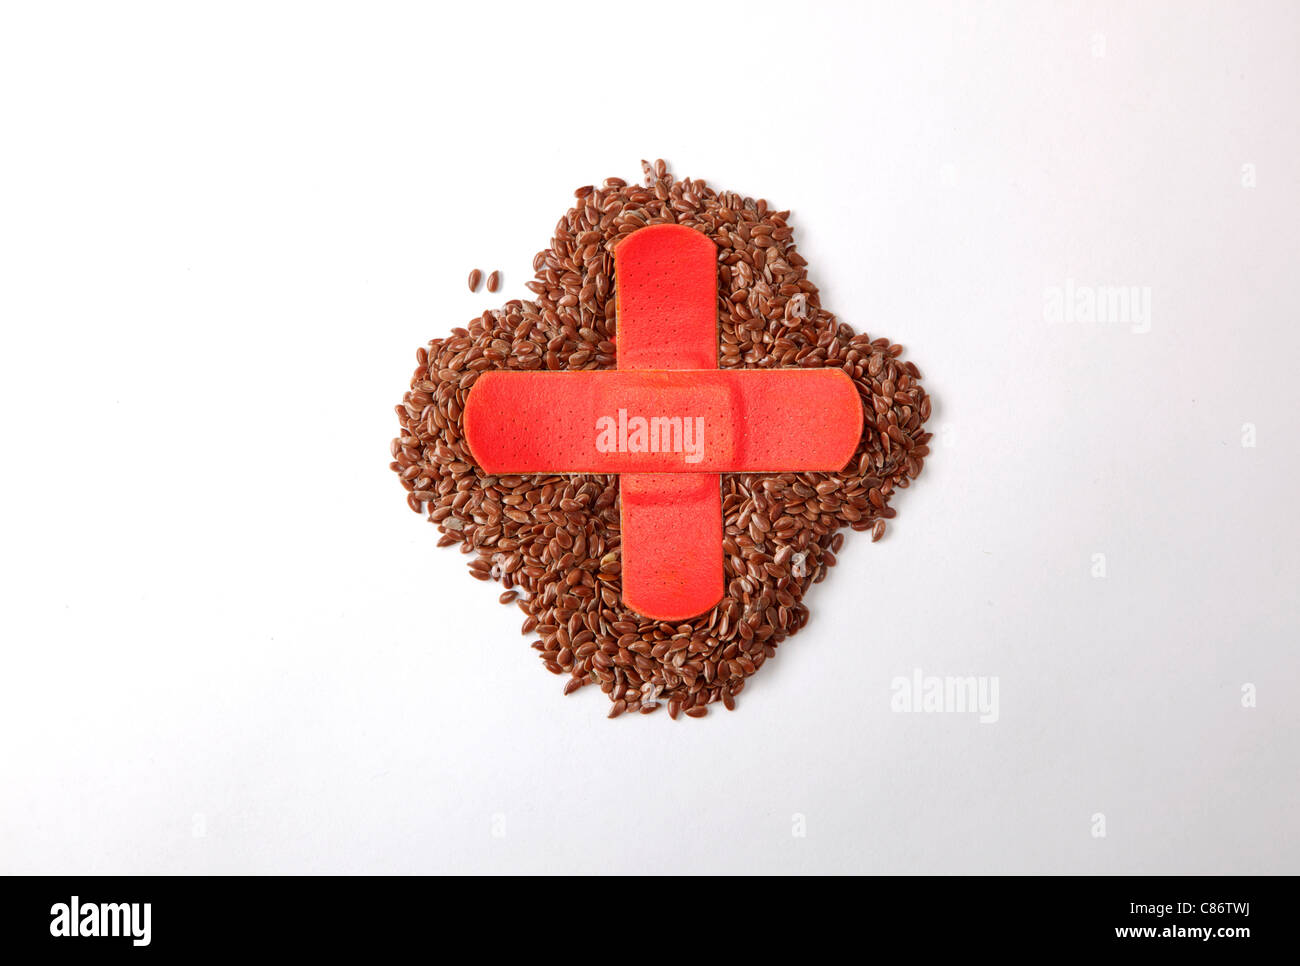 flax seeds with red cross made of bandaid over the top Stock Photo